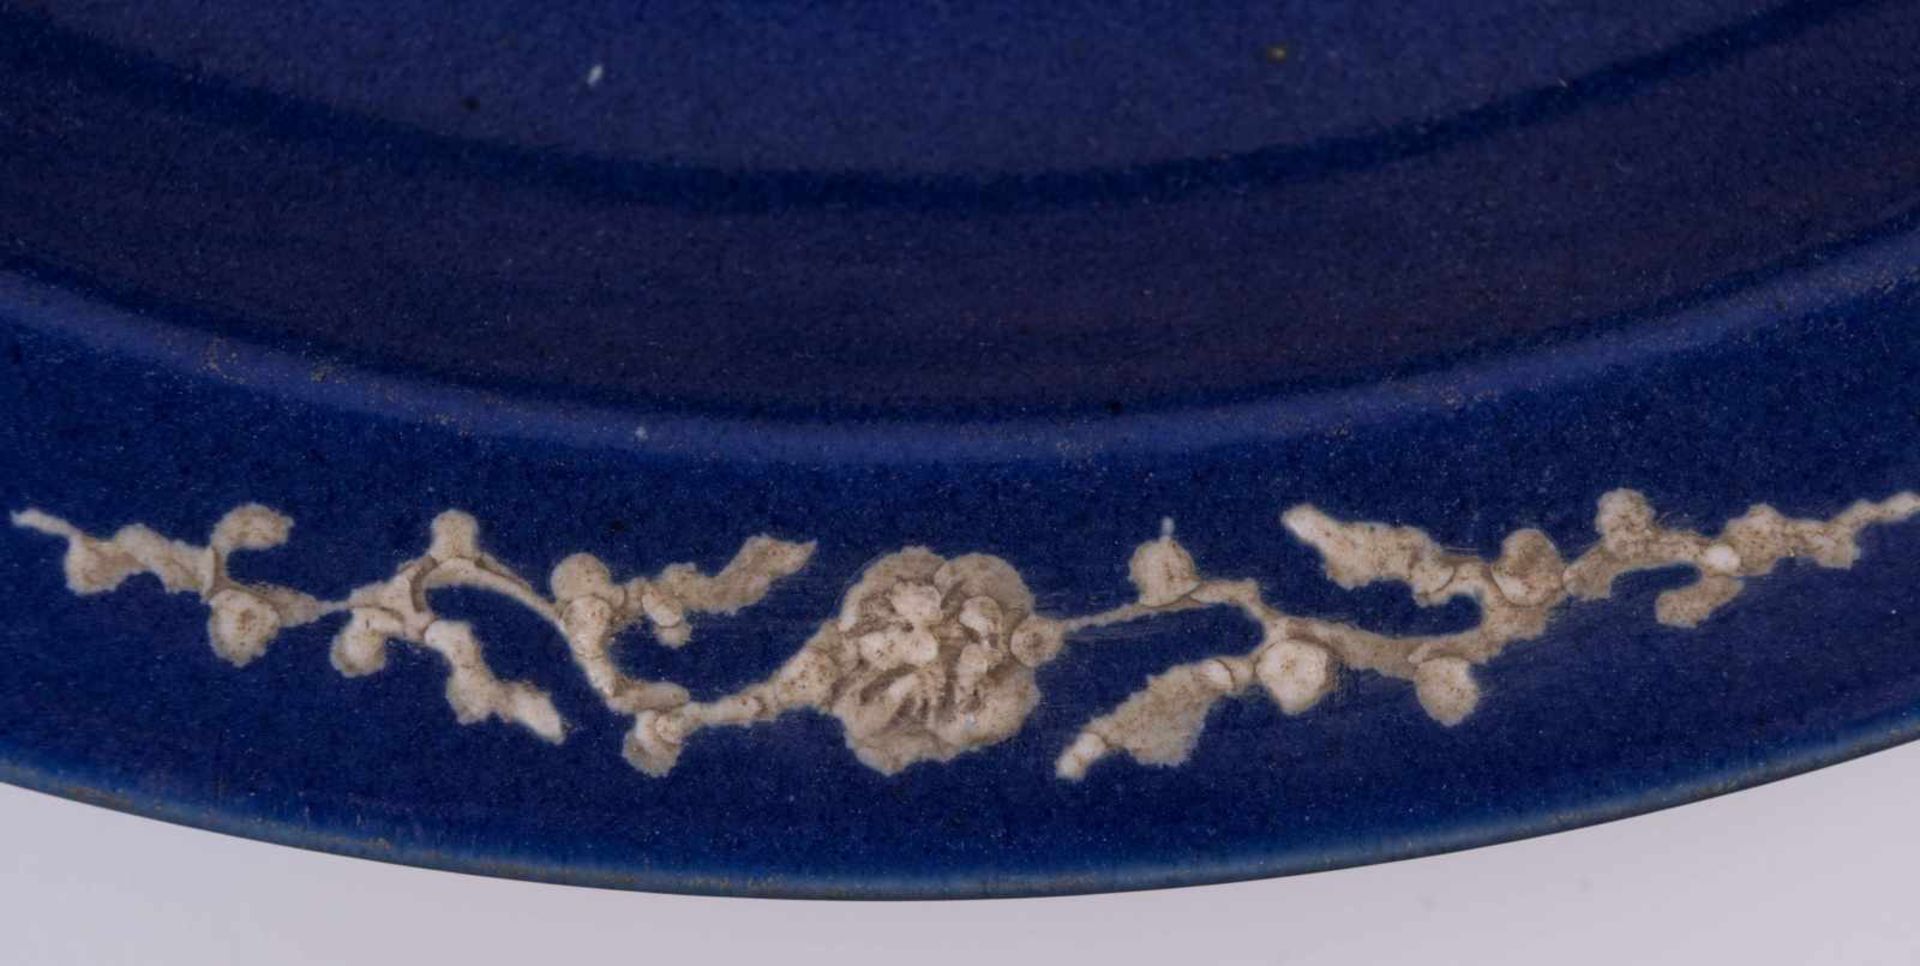 Großer Teller China 19./20. Jhd. / Large plate, China 19th/20th century blau mit reliefiertem - Image 3 of 6